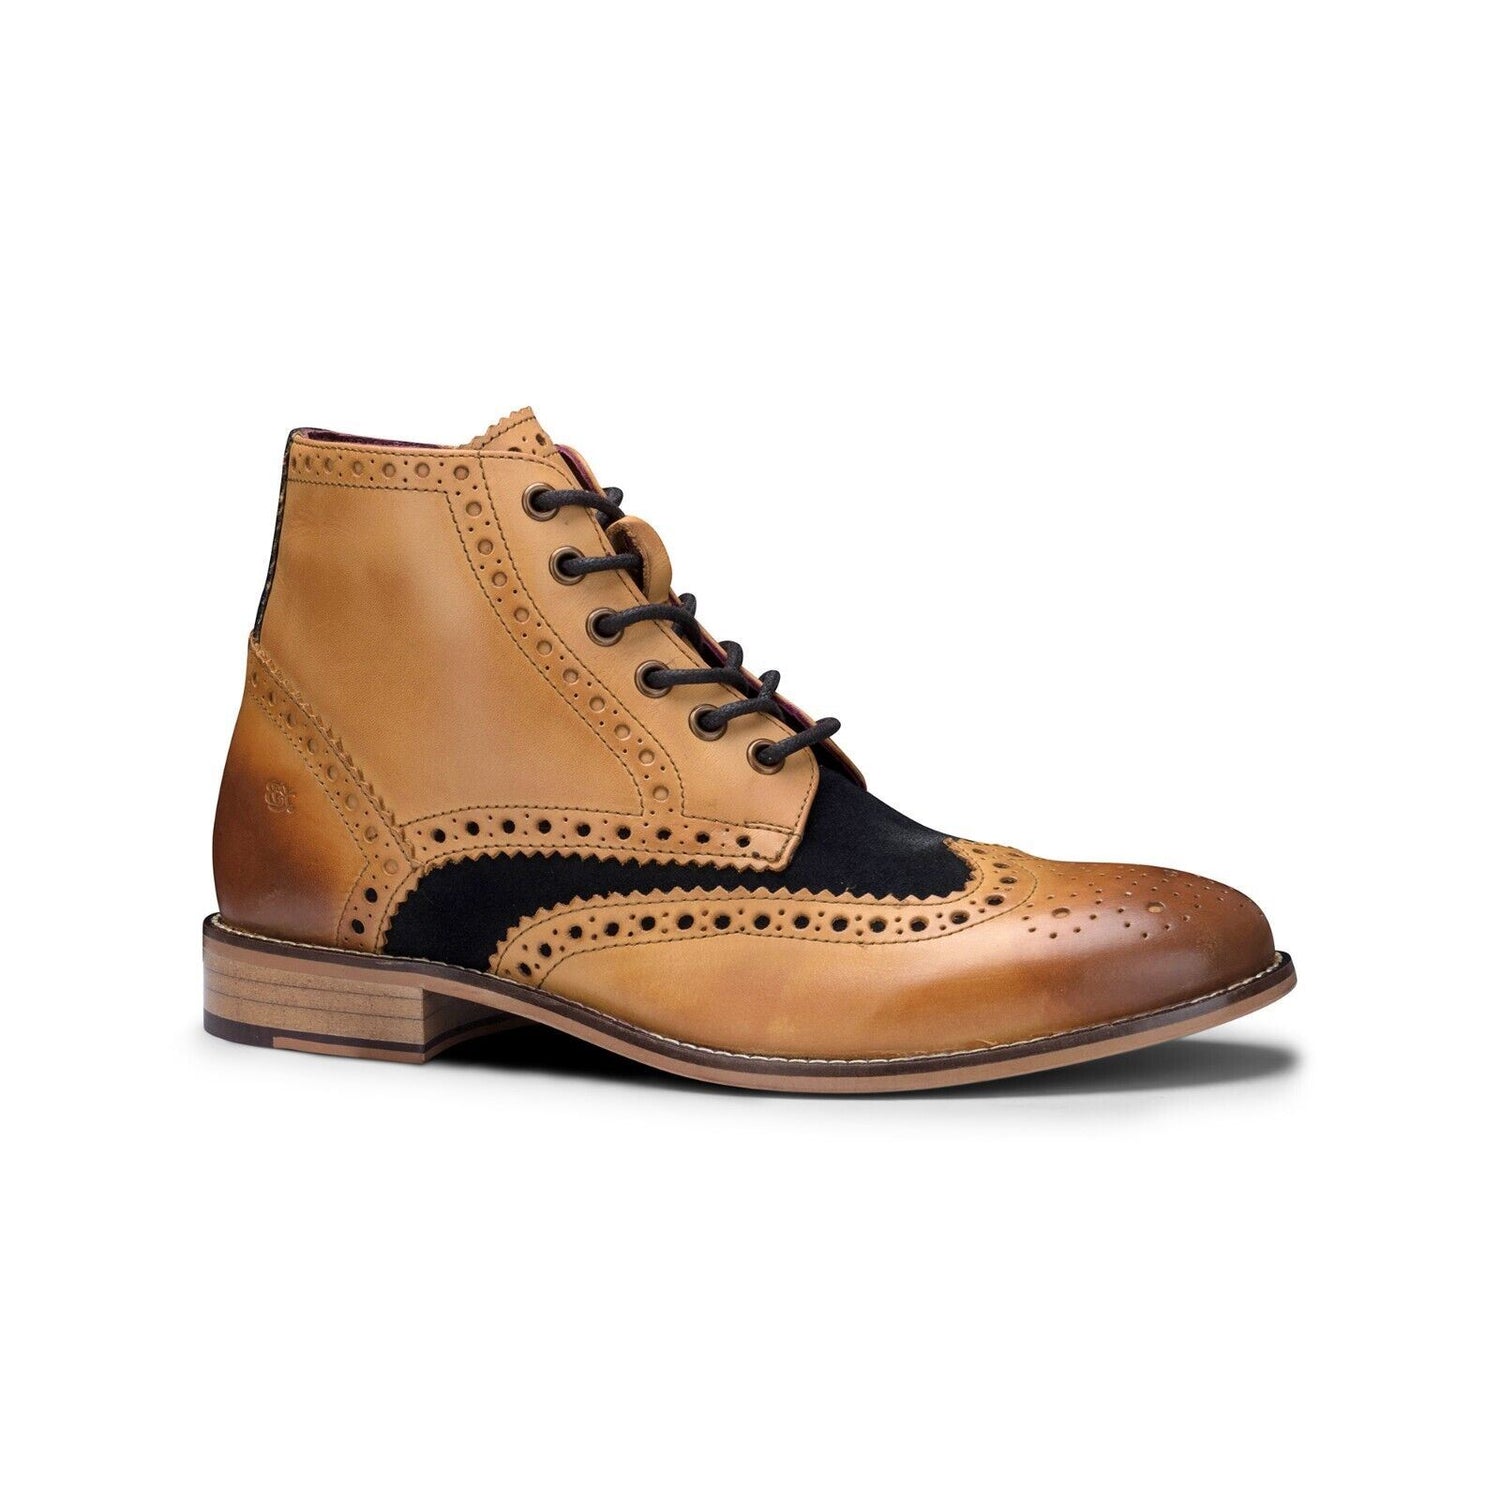 Mens Classic Oxford Tan Leather Gatsby Brogue Ankle Boots with Navy Suede - Upperclass Fashions 